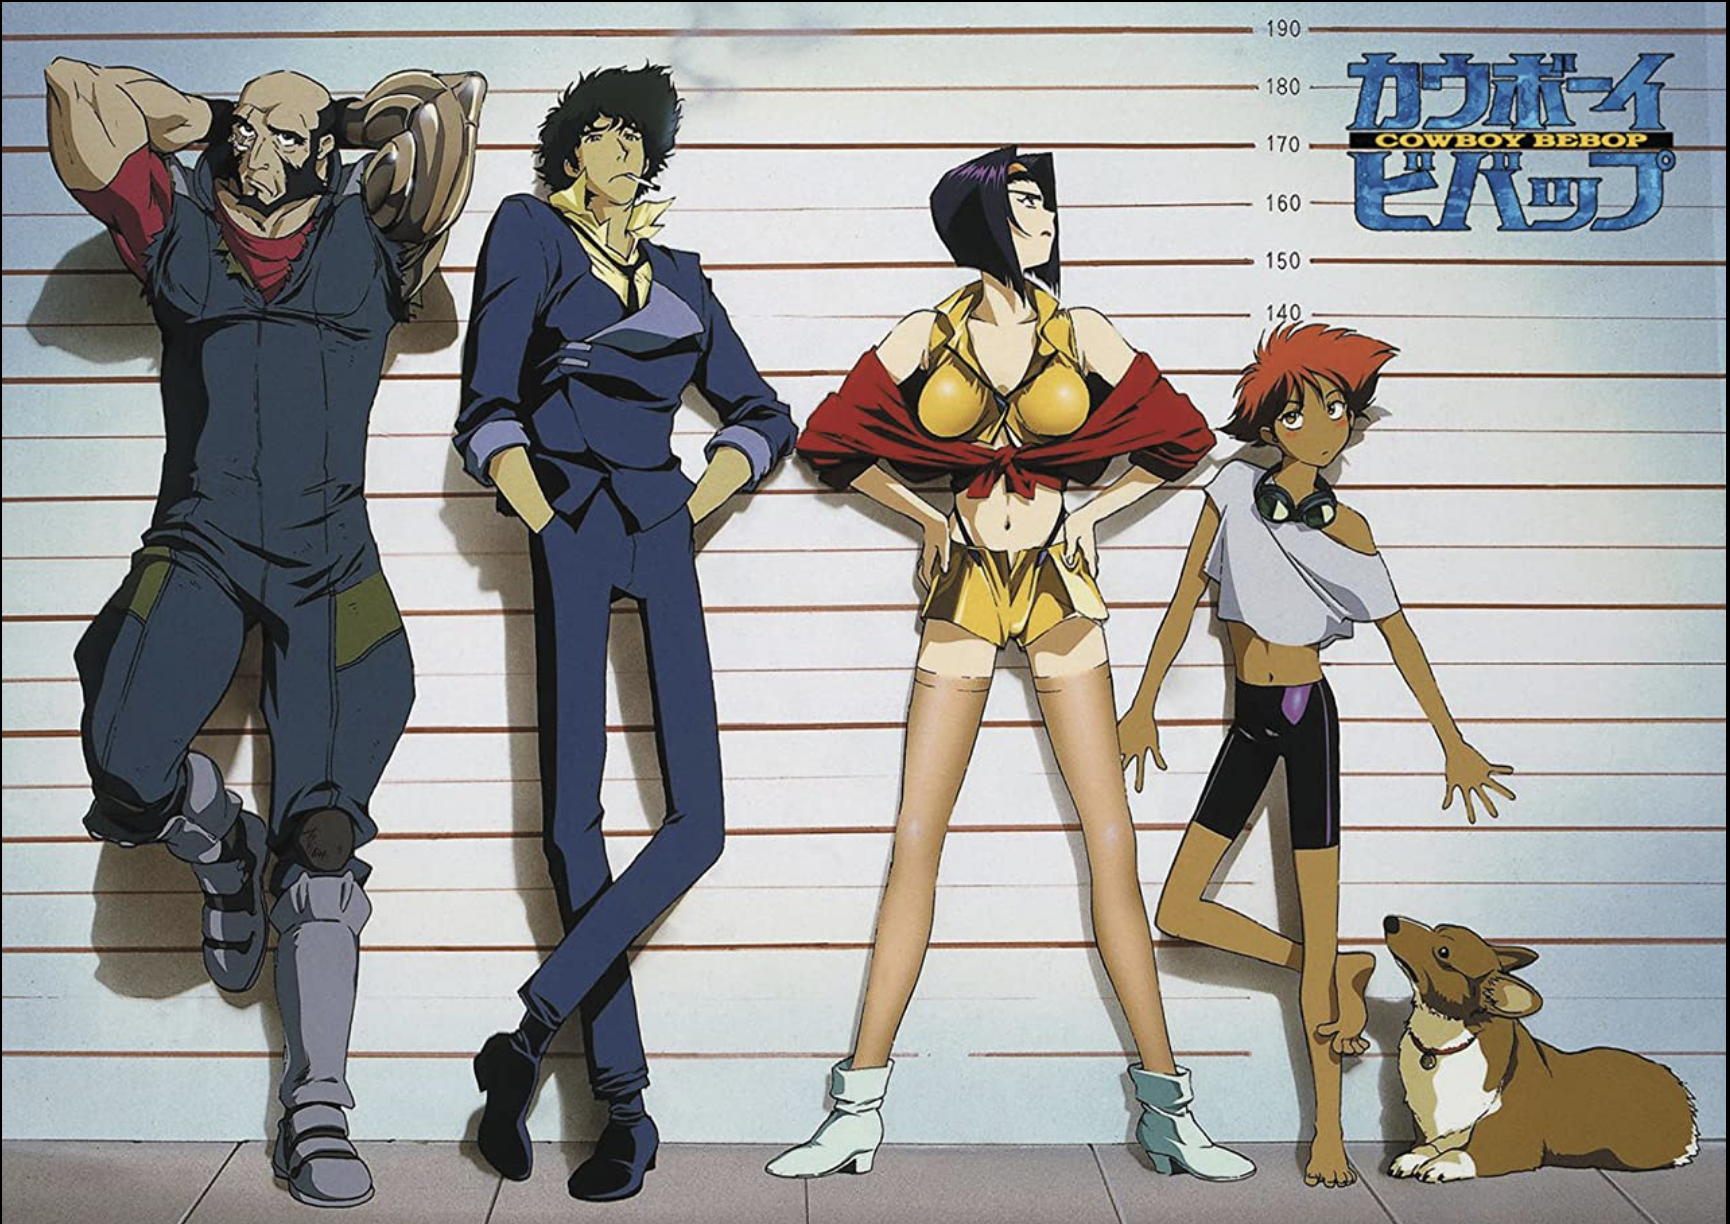 A line-up of the 1998 Cowboy Bebop cast, featuring them against a mugshot background.